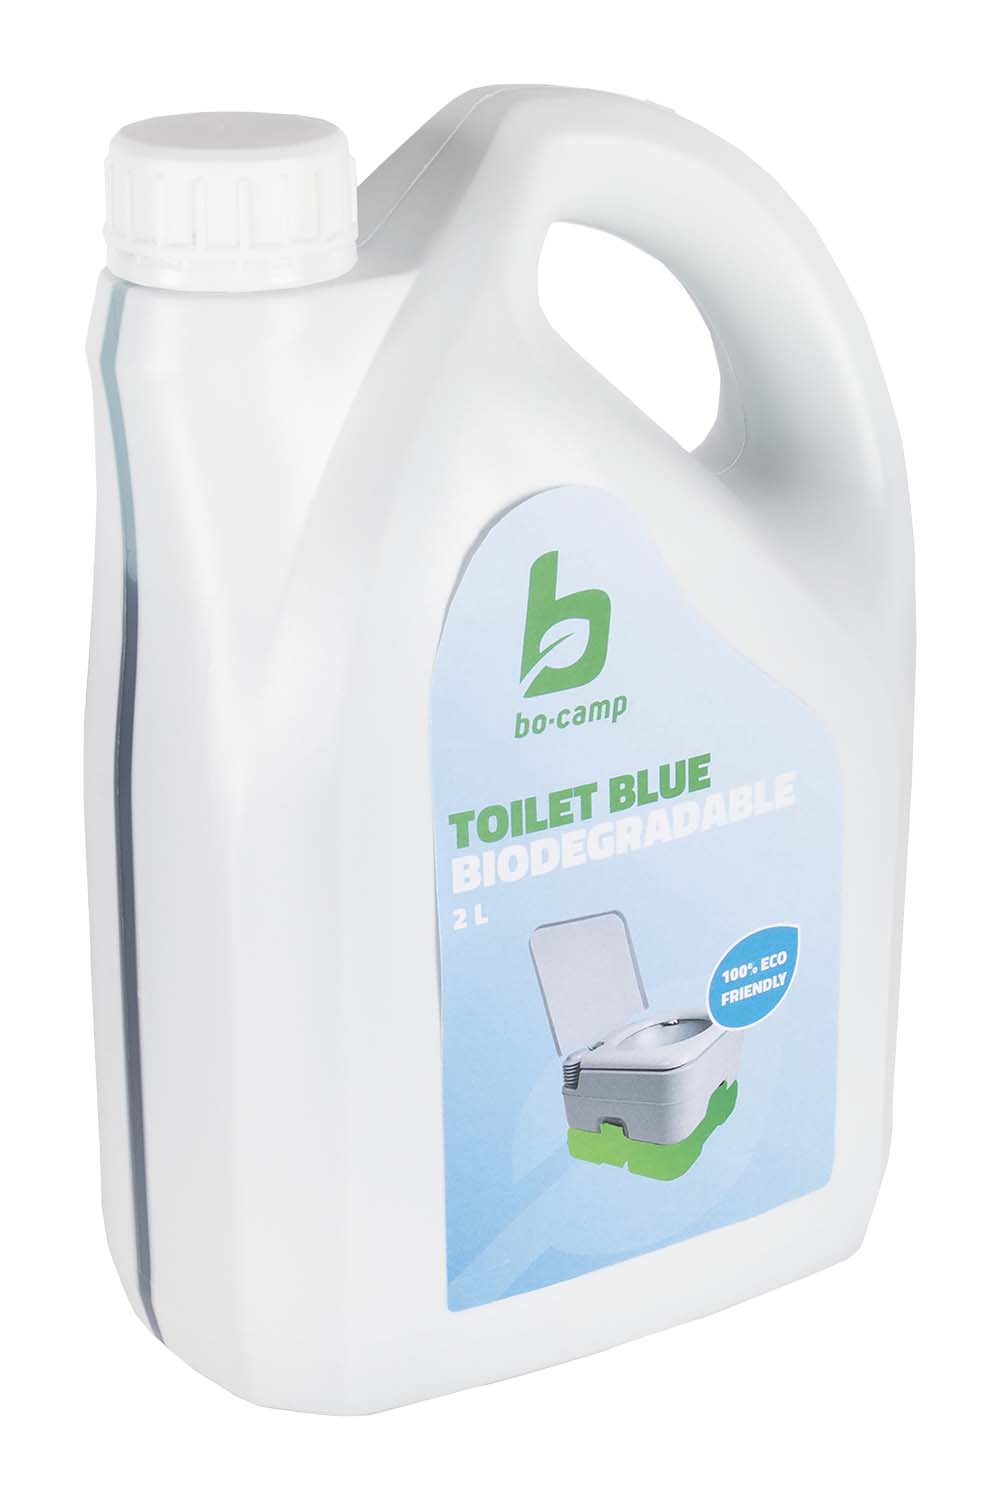 5507100 Bo-Camp Toilet fluid blue is a biodegradable toilet fluid for daily use in the waste holding tank of the portable toilet. Bo-Camp Toilet fluid blue has a very pleasant smell and keeps the use of your portable toilet clean and fresh by masking unpleasant odors and gas formation. A 2 liter bottle is suitable for approximately 20 refills.